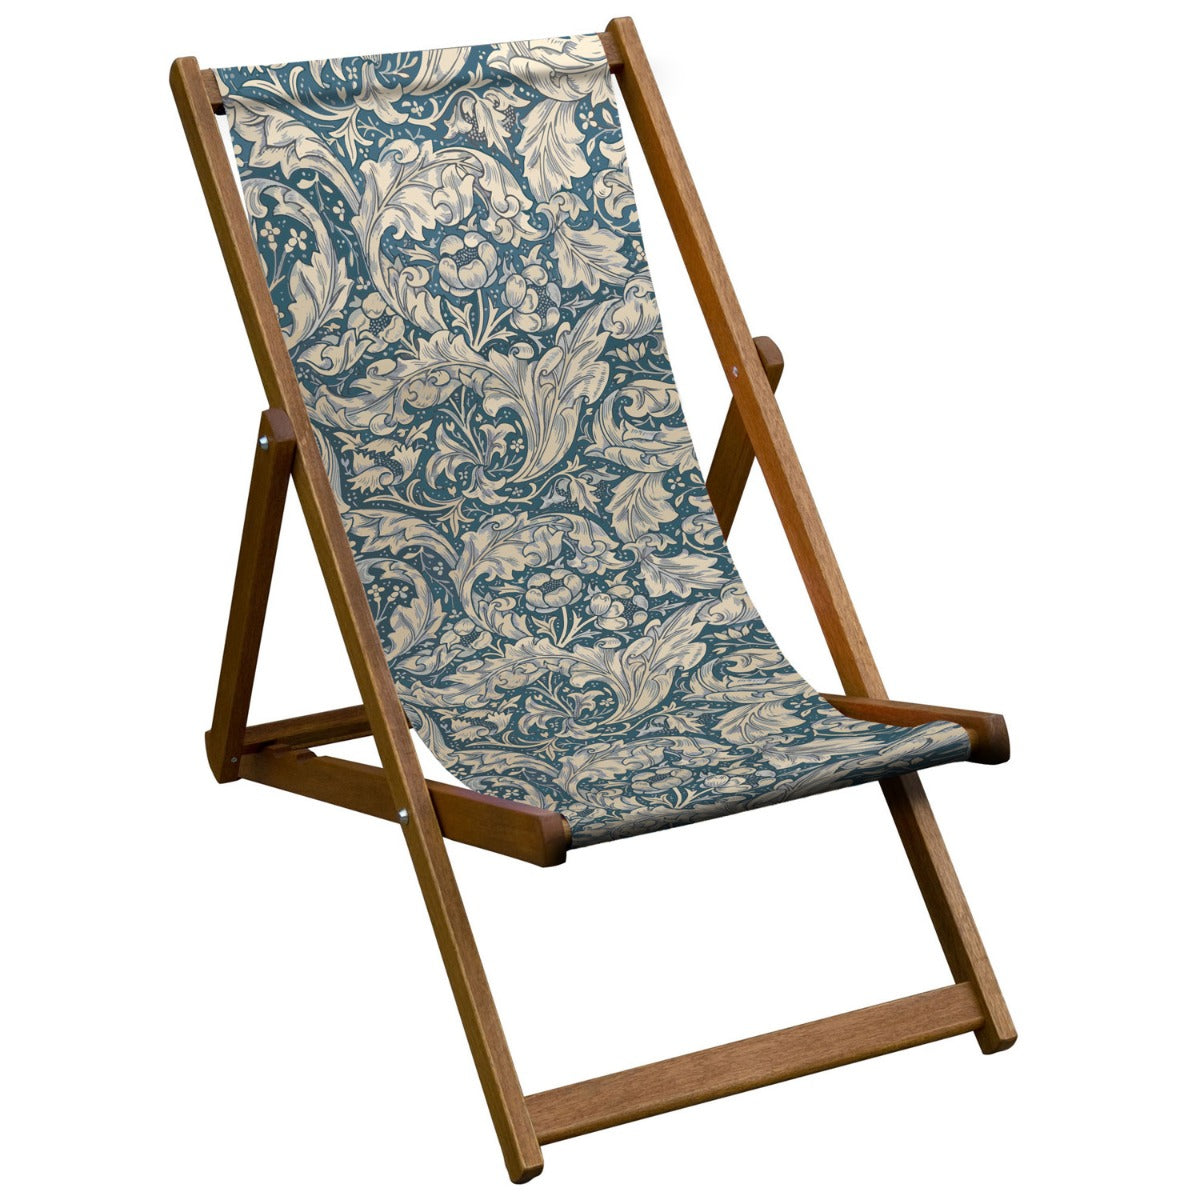 Vintage Inspired Wooden Deckchair with William Morris 'Bachelors Buttons' Design